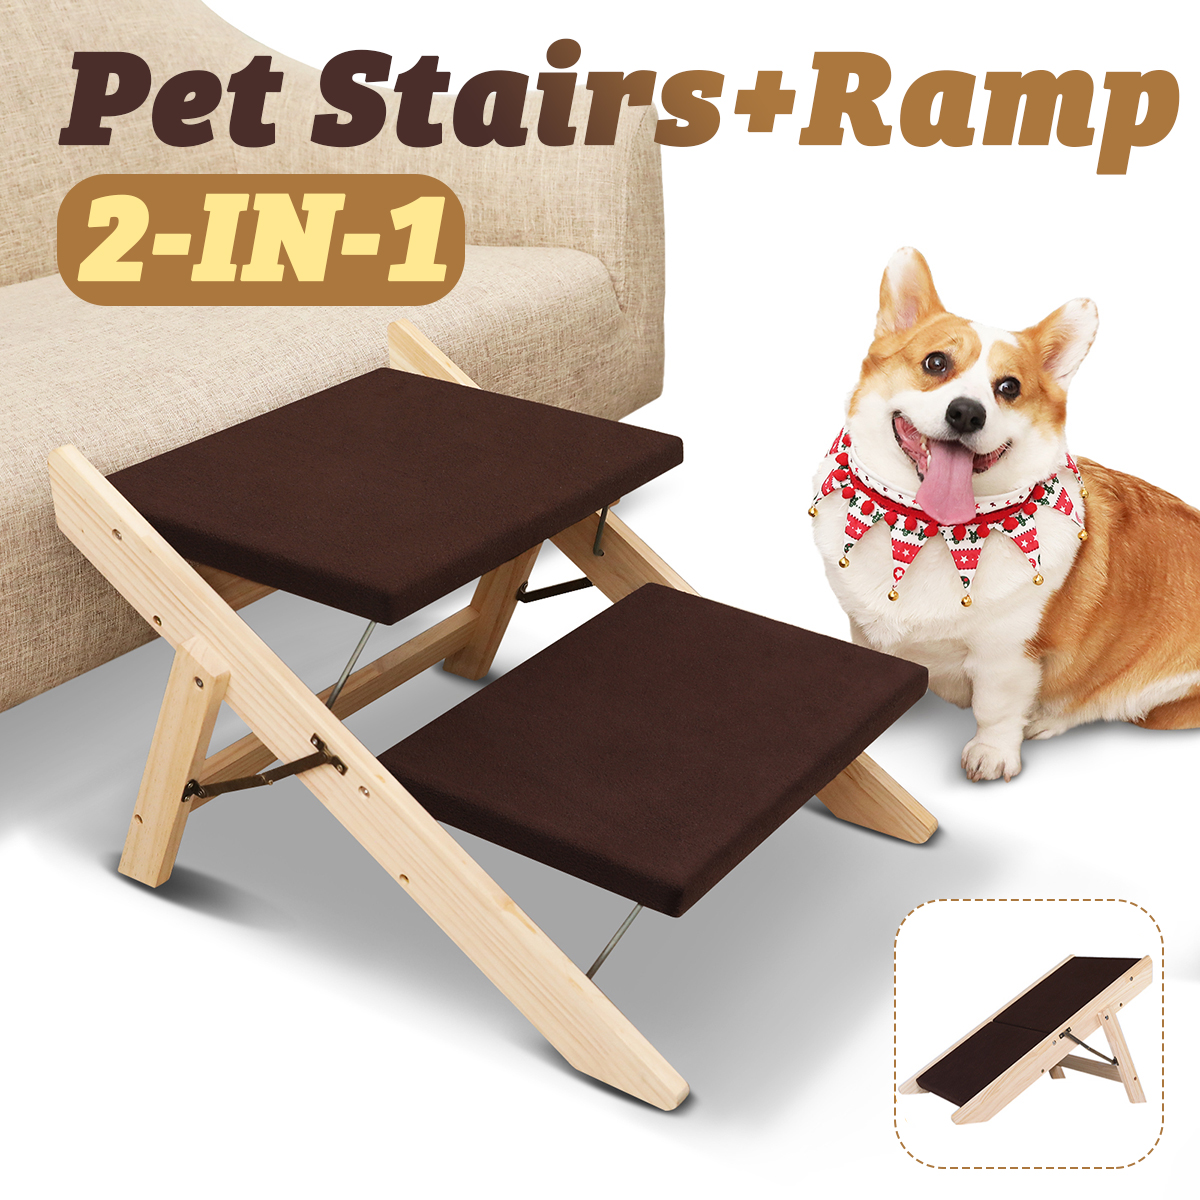 2-in-1-Portable-Folding-Safety-Pet-Stairs-Ramp-for-Dogs-and-Cats-Steps-Ladder-Puppy-Supplies-1957291-12